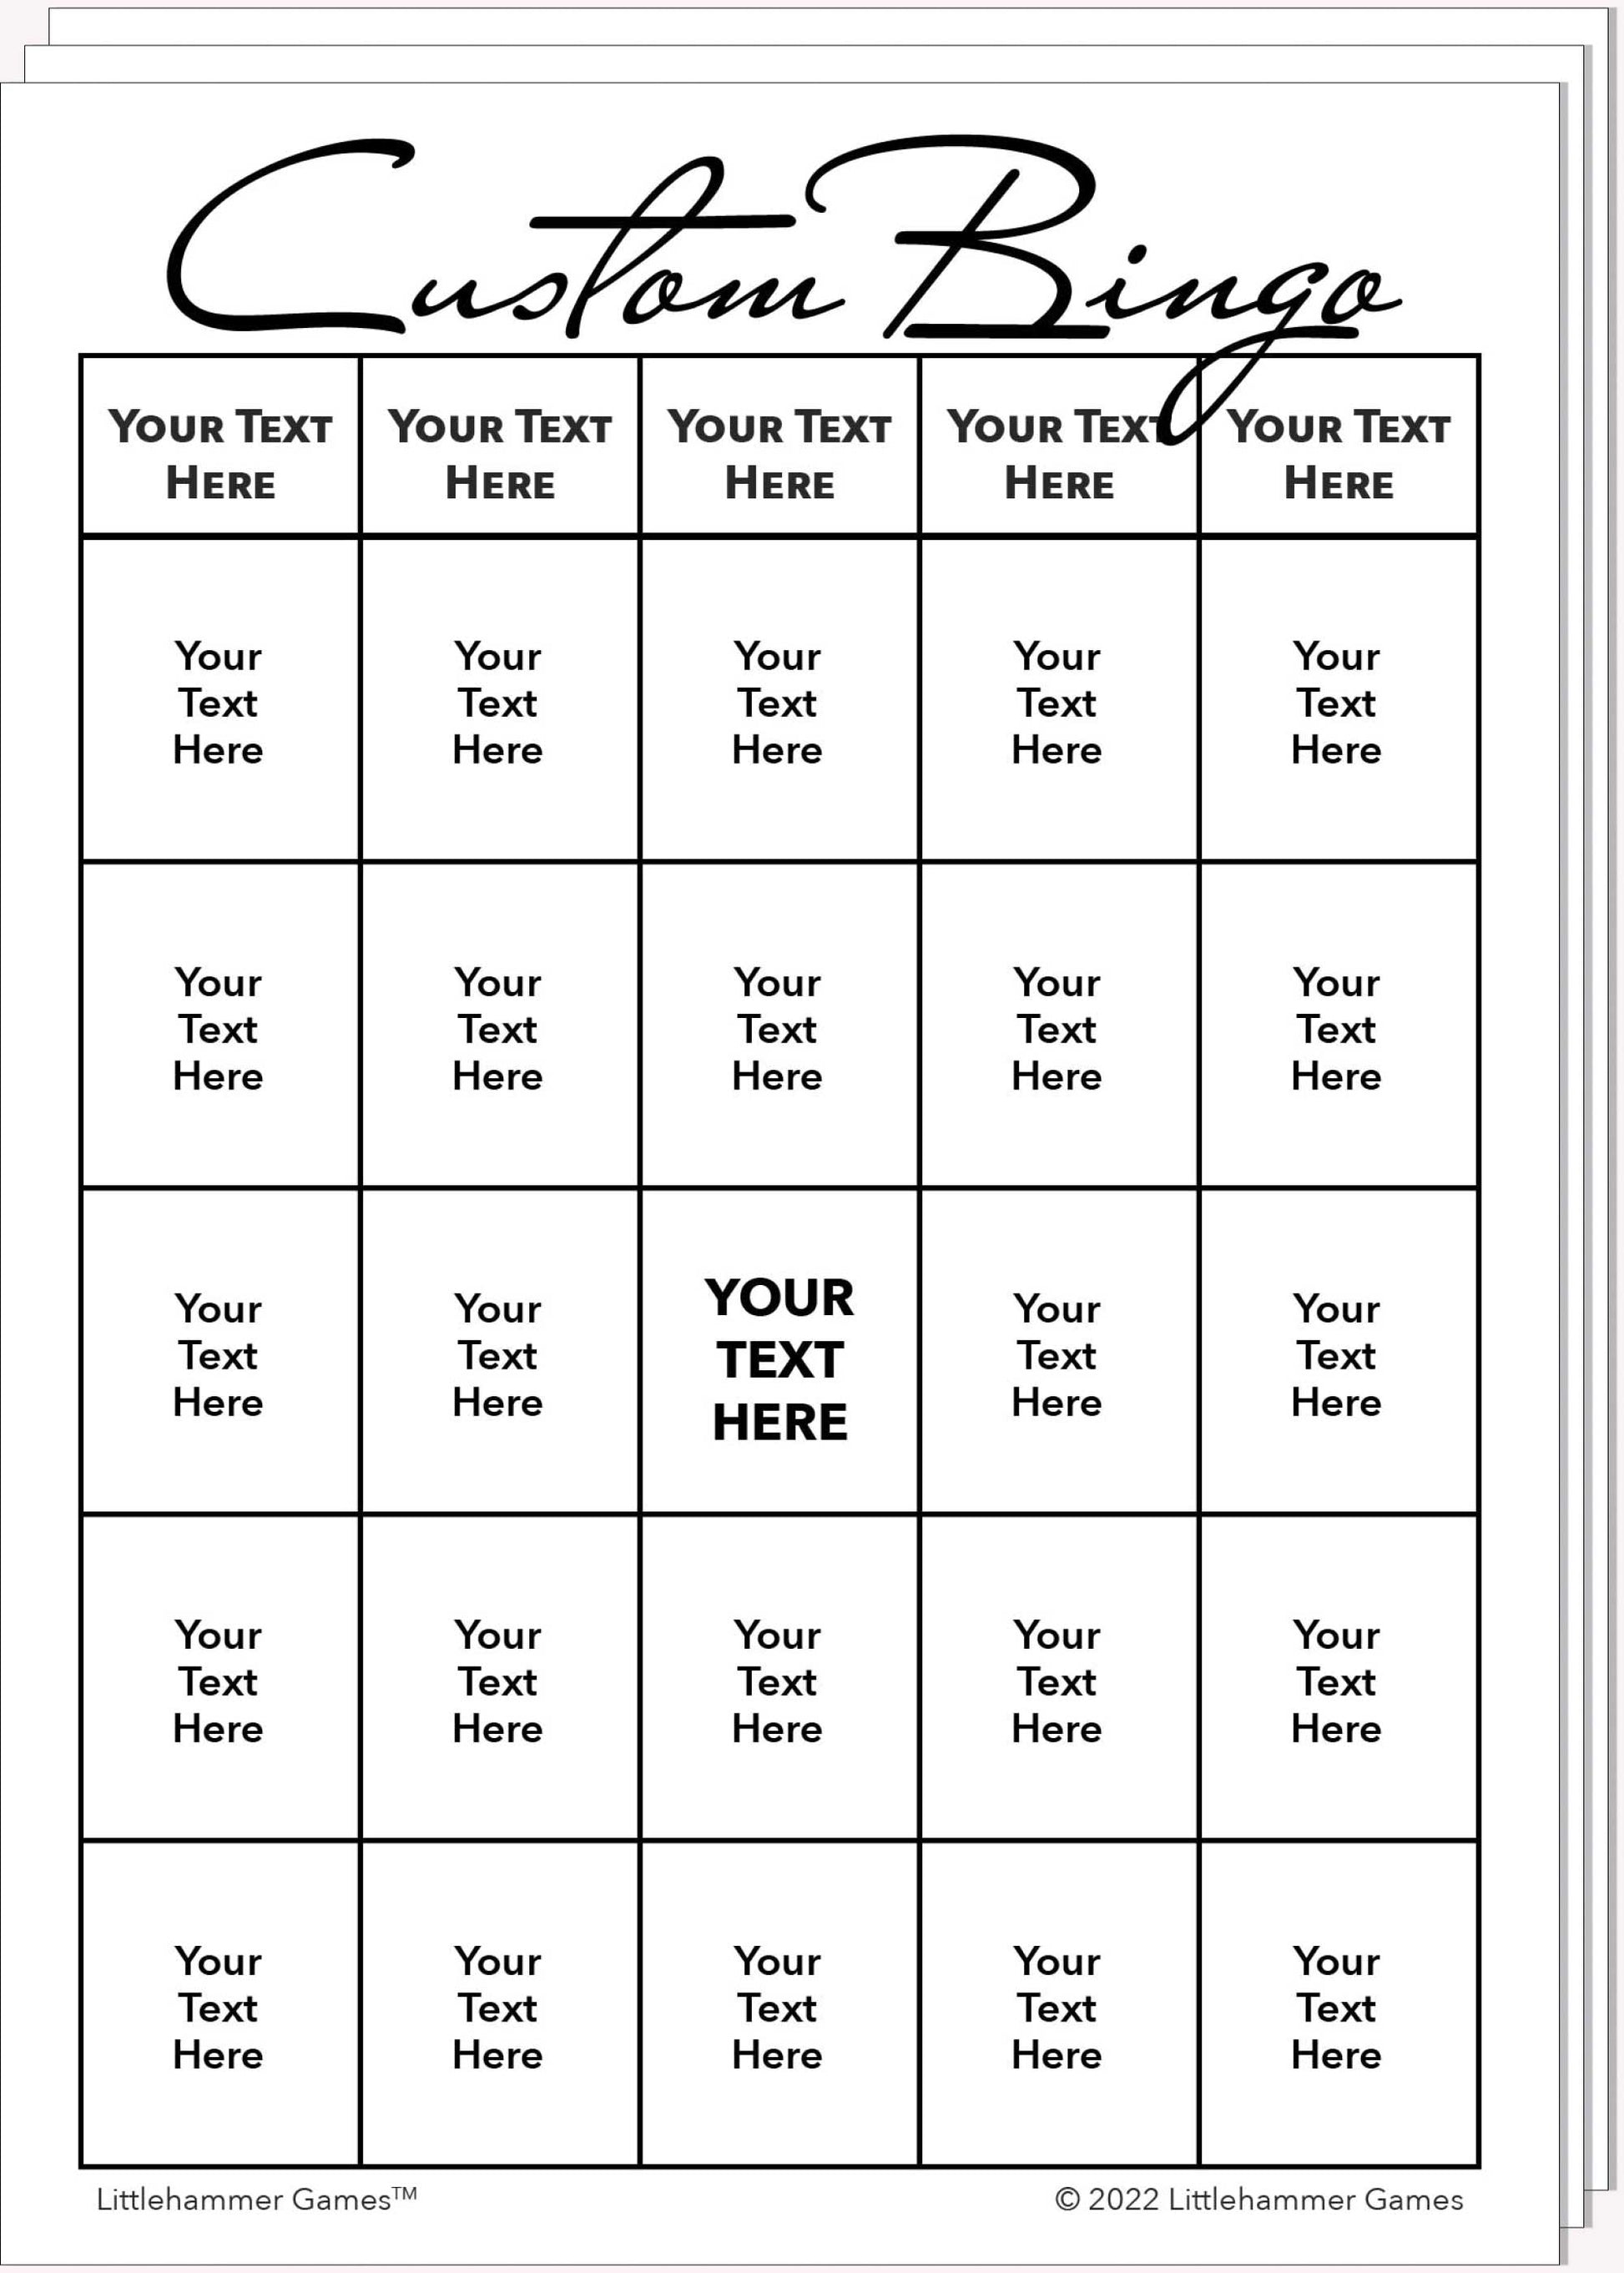 Stack of Custom Bingo game cards with black text on a white background